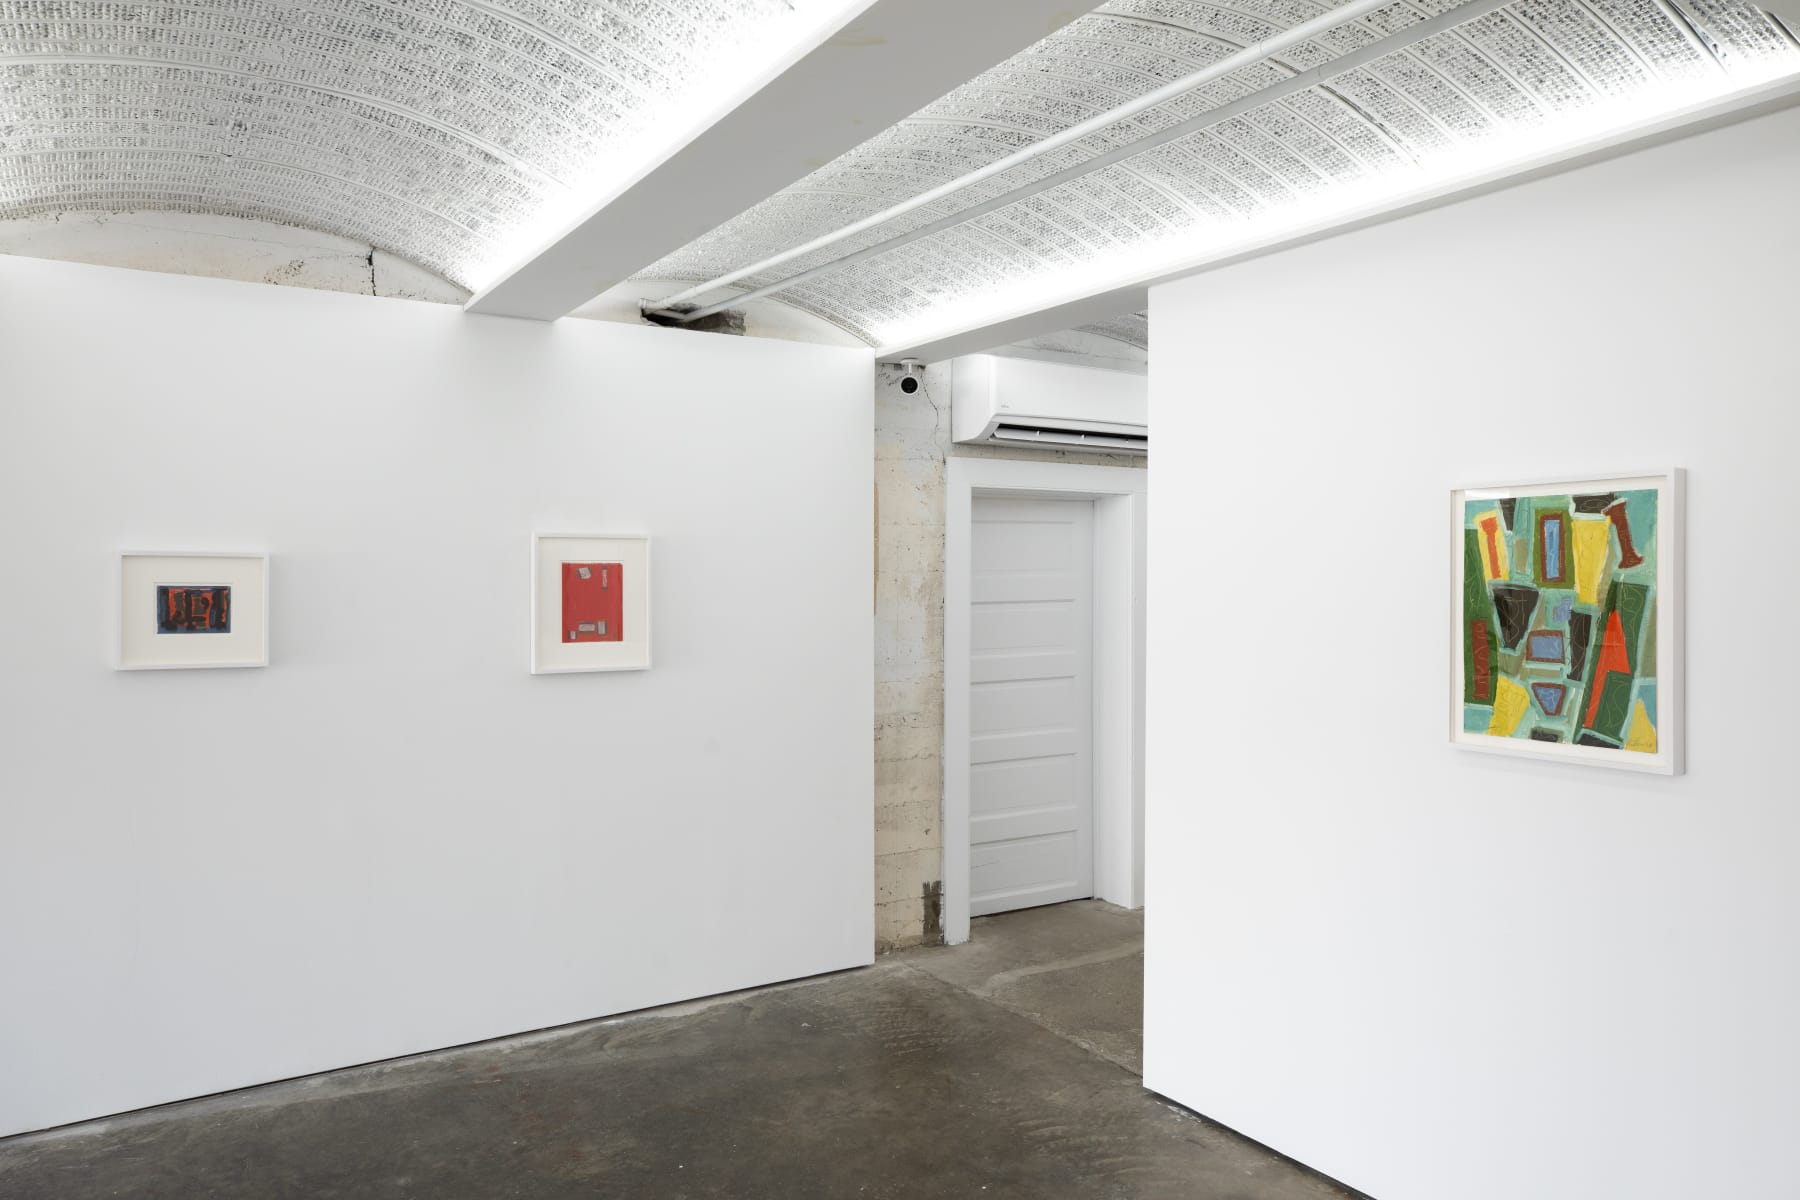 Betty Parsons: 1950s Works on Paper, installation view, Alexander Gray Associates, New York (2020)